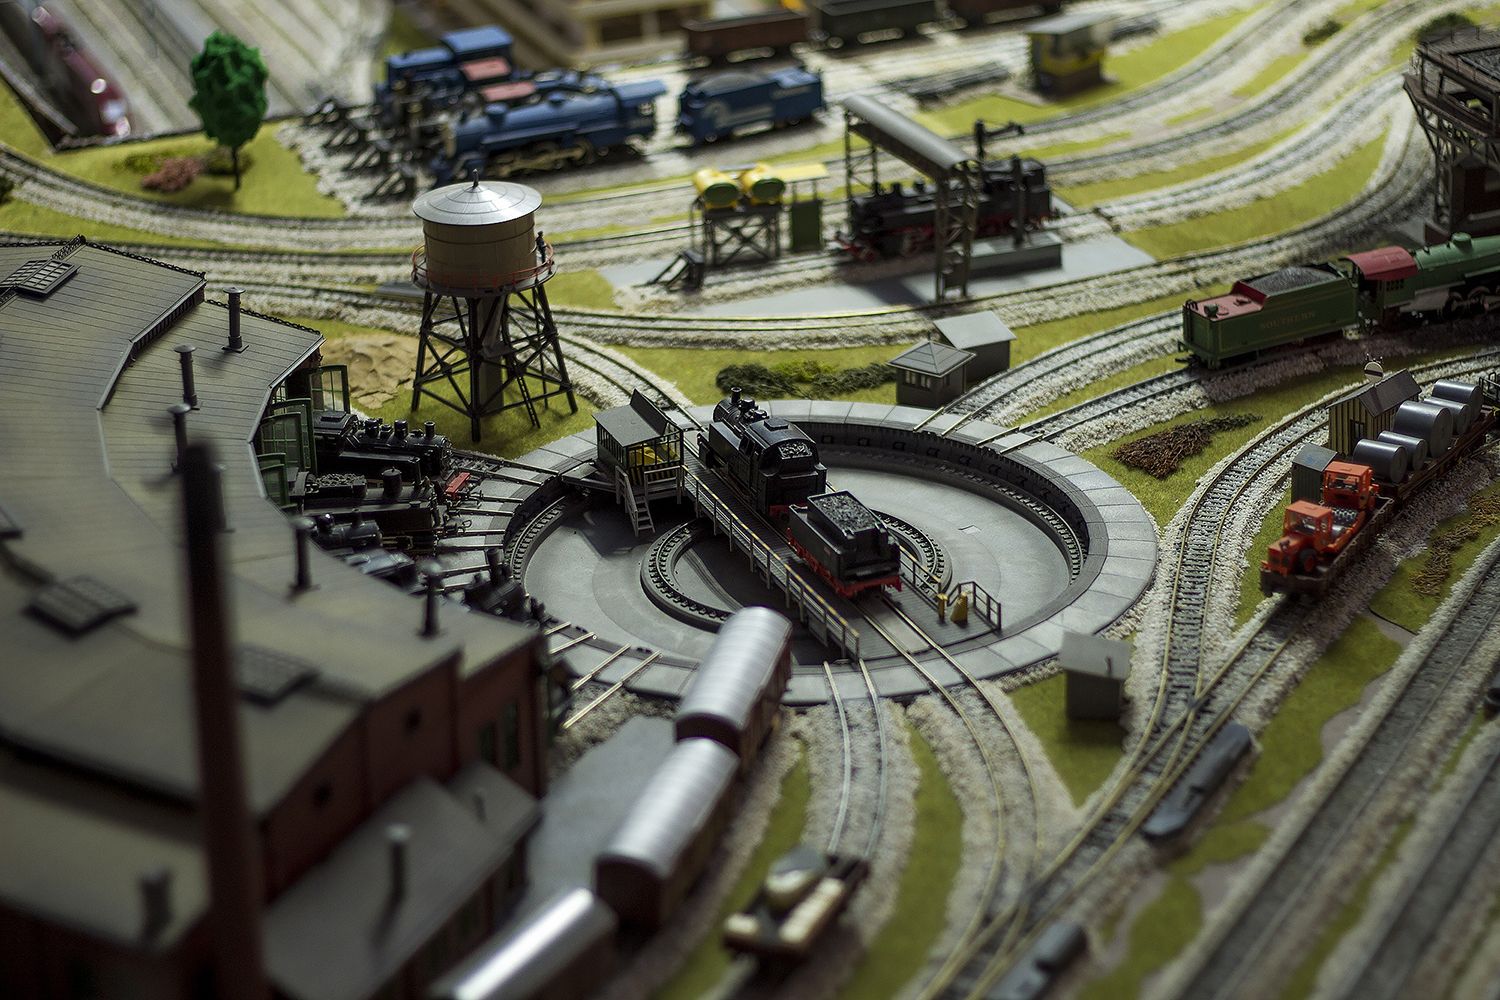 A model railroad in a popular layout with a turntable and model trains